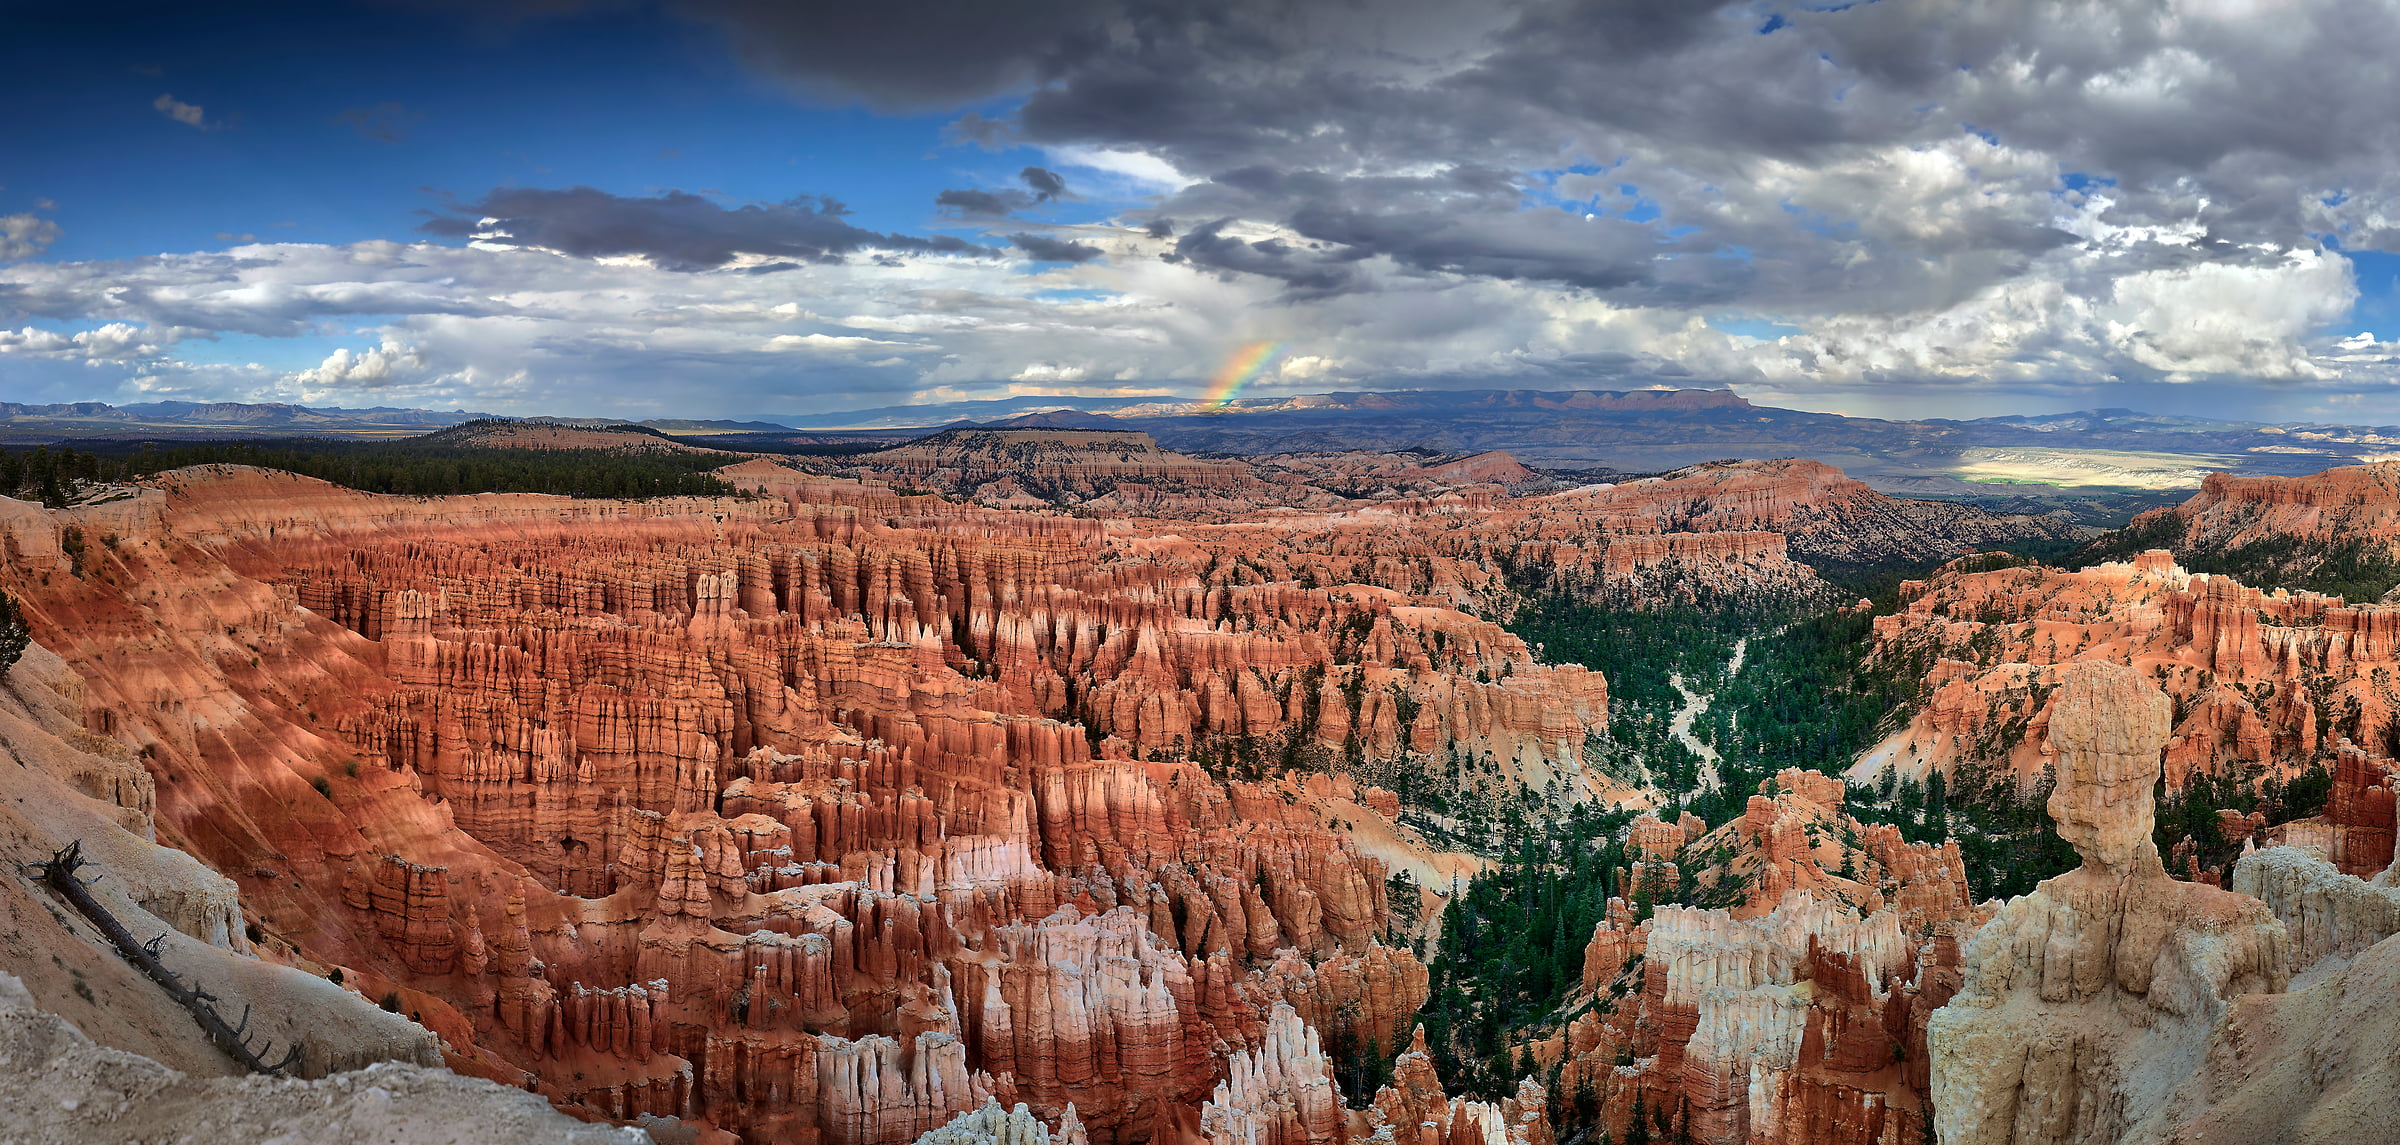 248 megapixels! A very high resolution landscape photo of Bryce Canyon National Park with a rainbow; VAST photo created by Phil Crawshay in Bryce Canyon, Utah, USA.